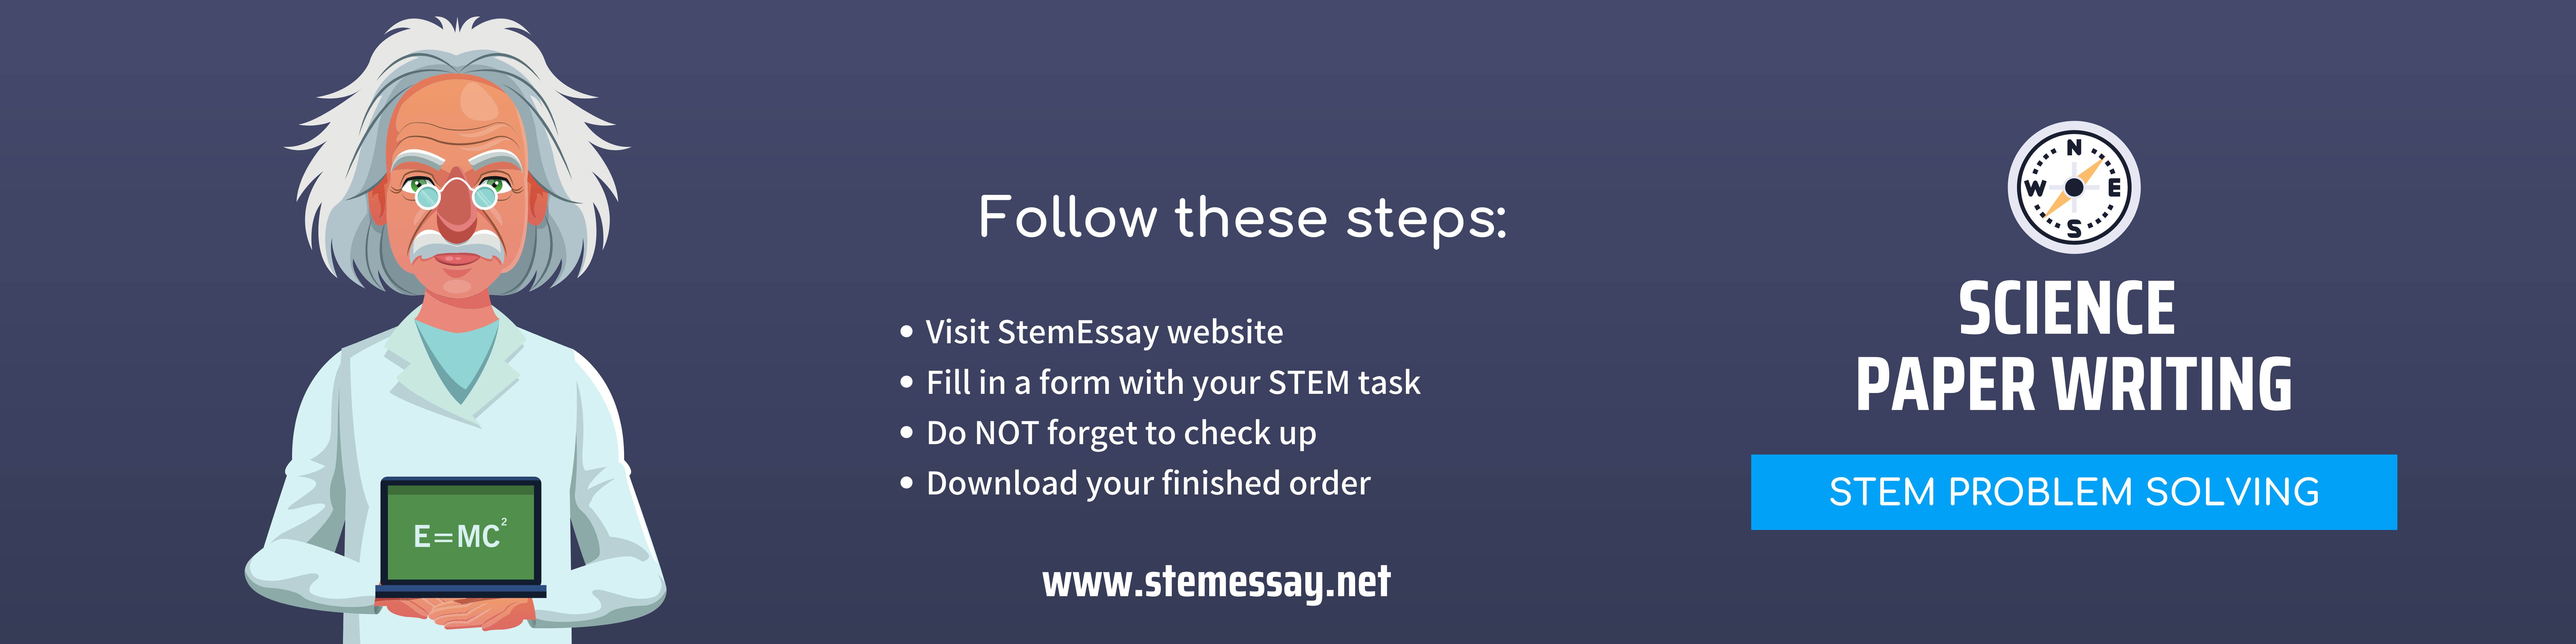 Science writing service for stem 
Stemessay.net